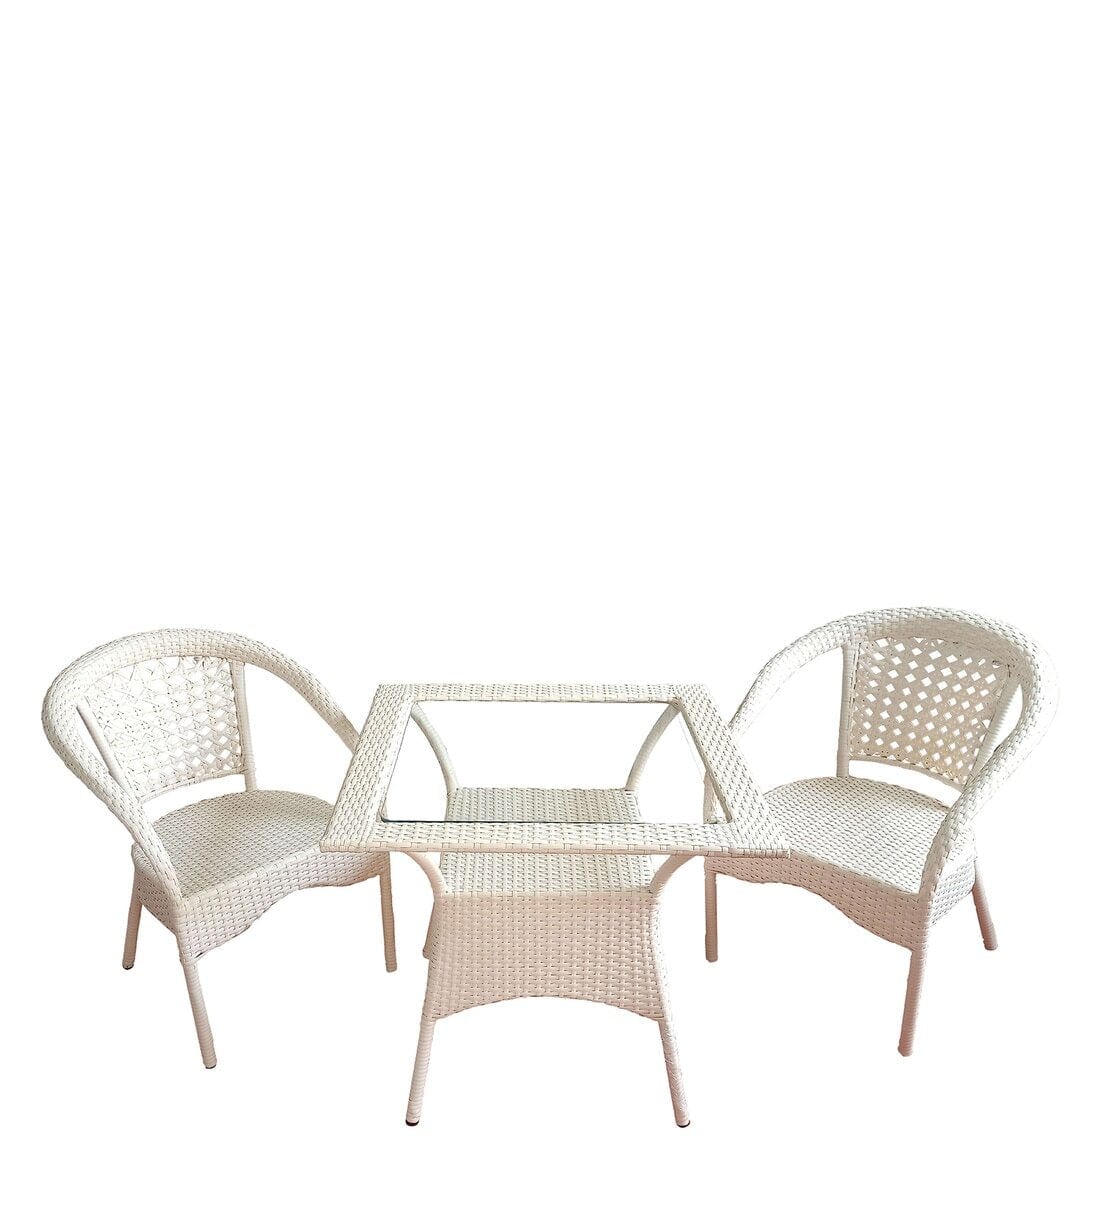 Dreamline Garden Patio Coffee Table Set (1+2), 2 Chairs And Small Square Table (Cream)